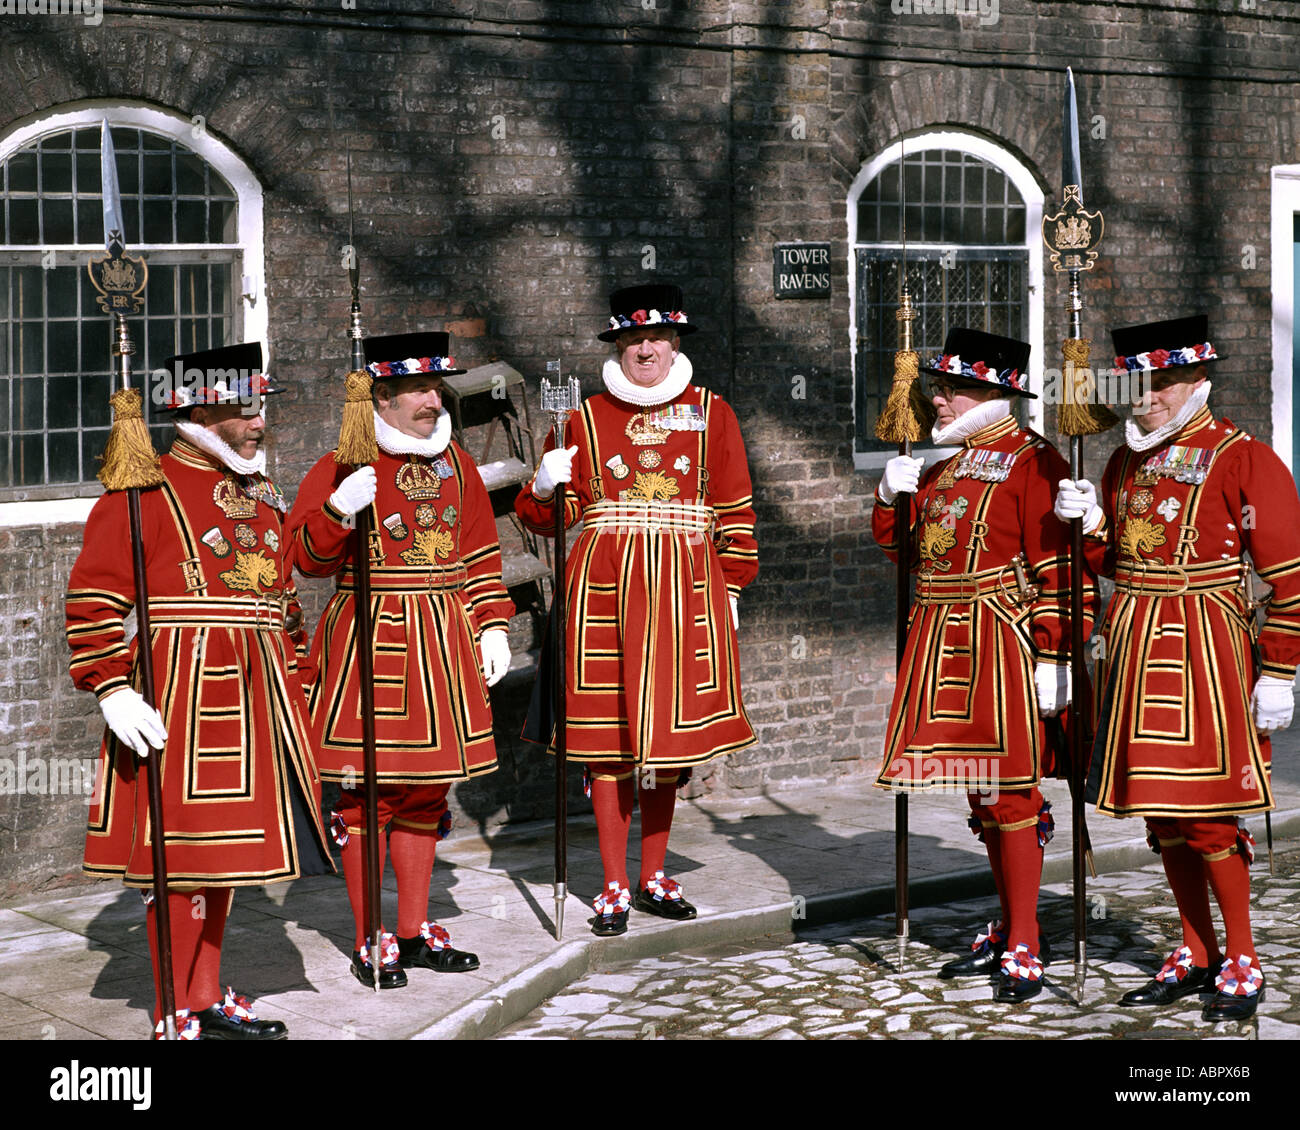 GB - LONDON: Yeoman Warders at the Tower of London Stock Photo